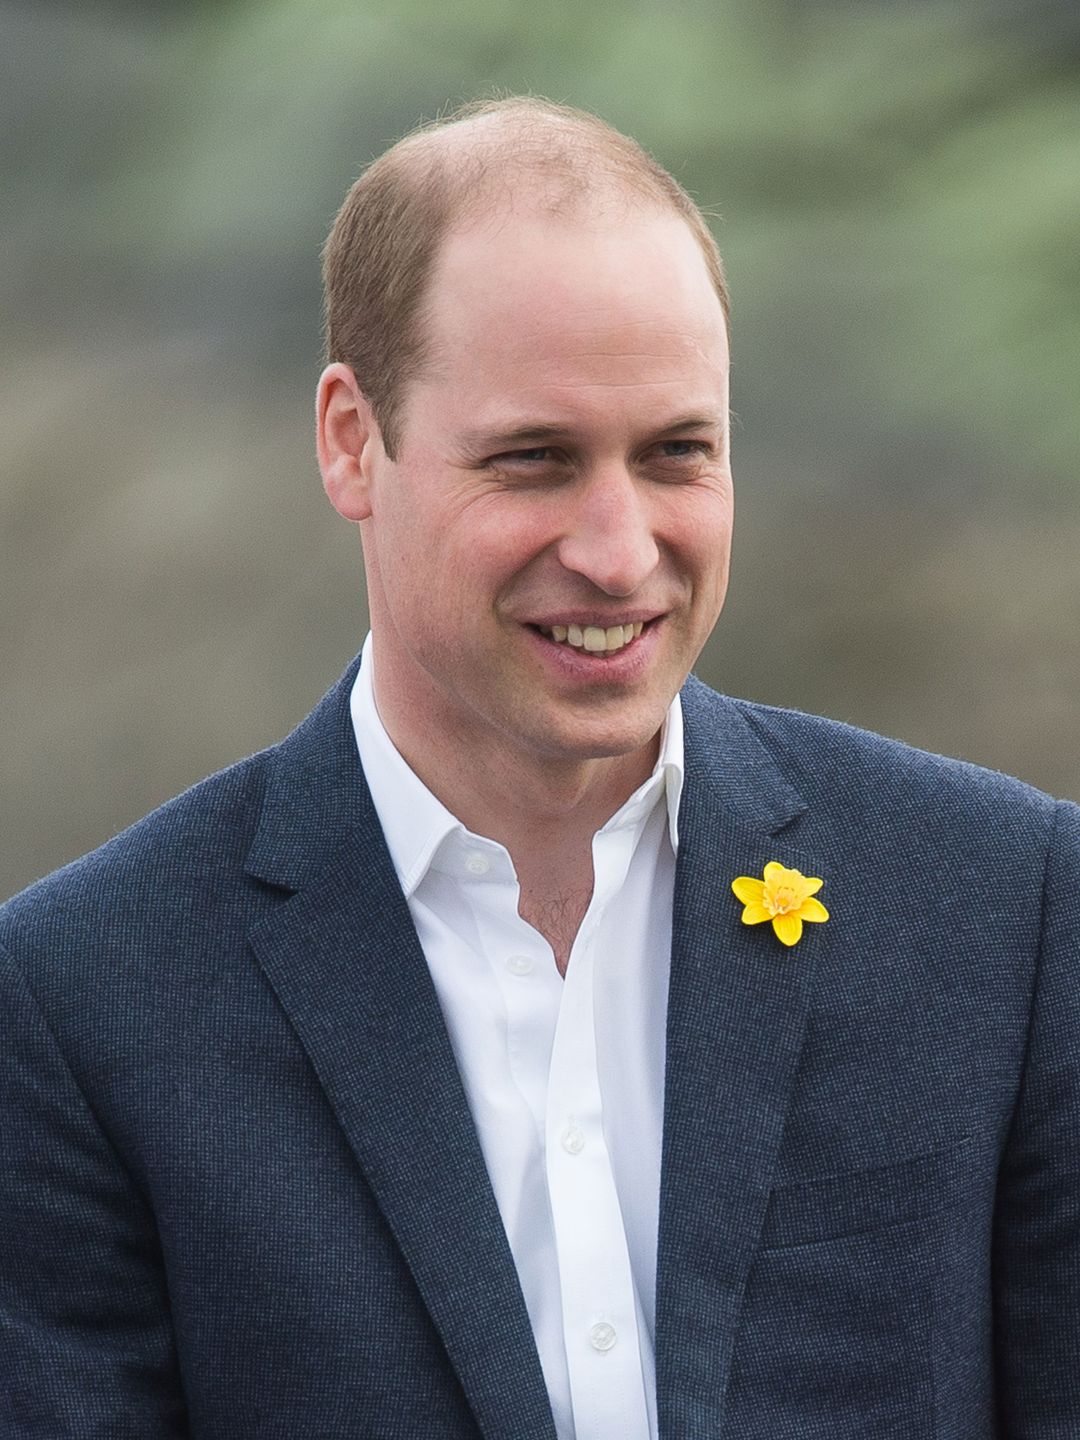 Prince William does he have kids